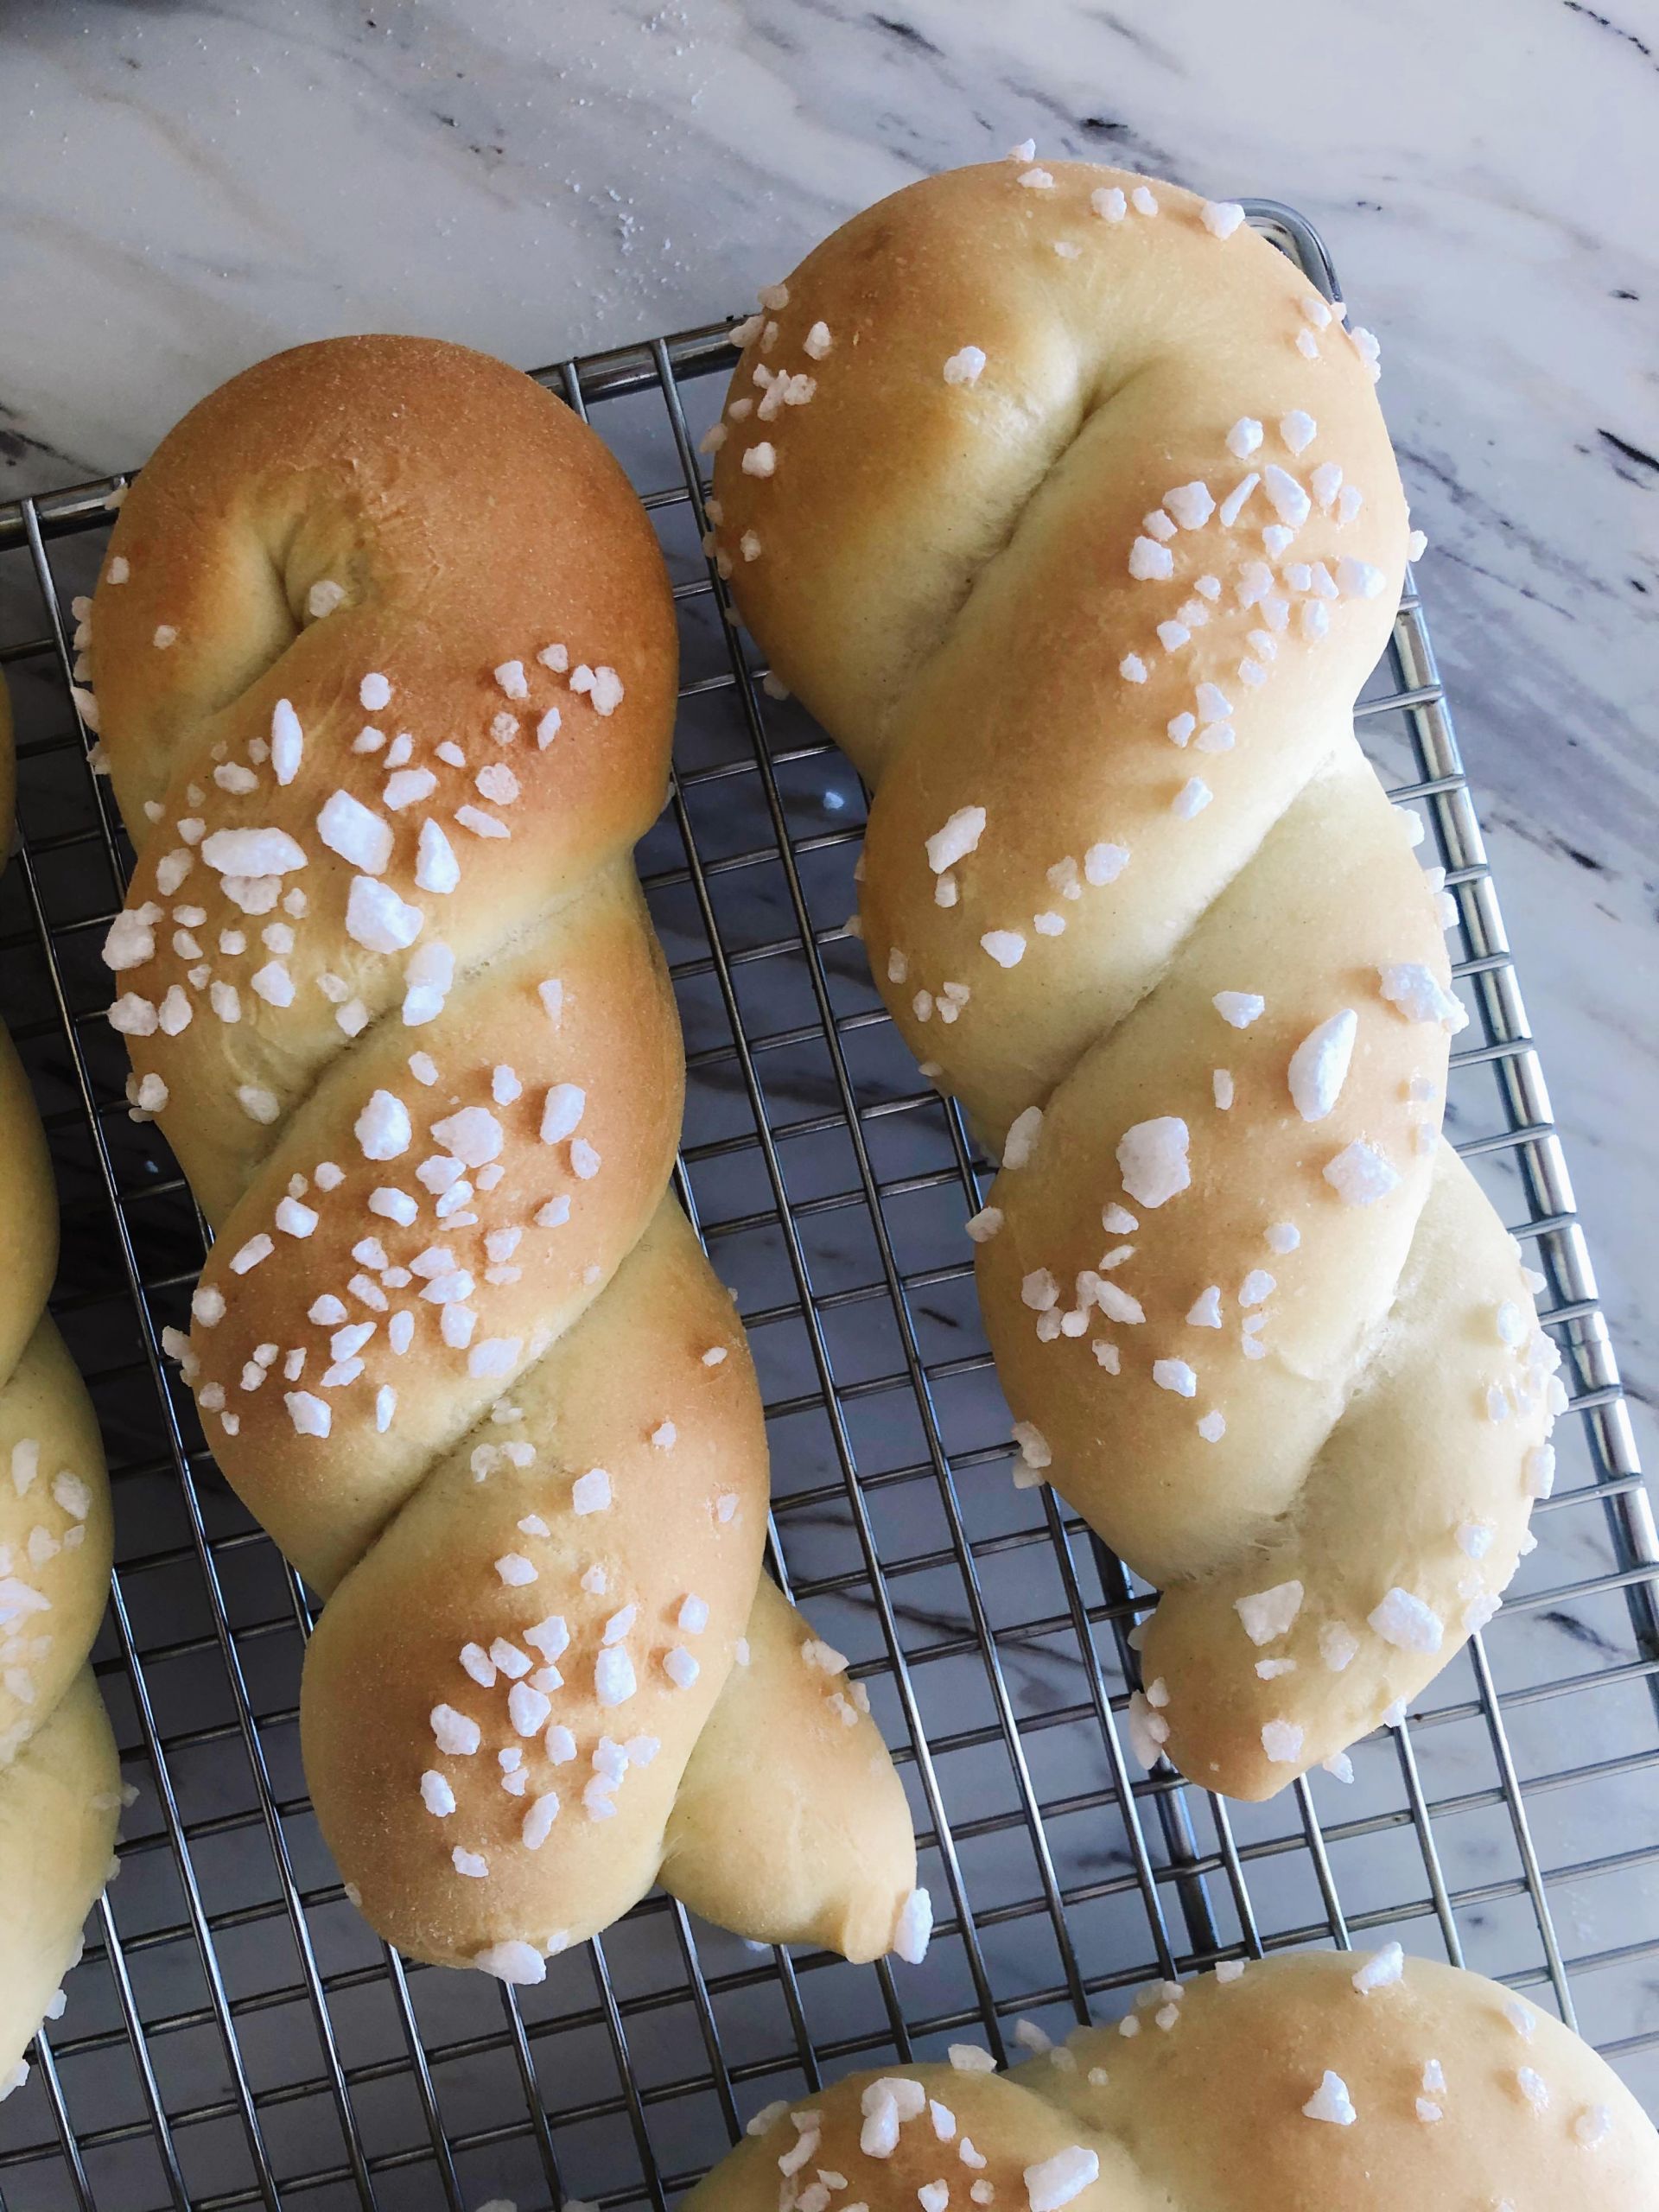 Two twists of sweet yeast dough after being rolled in pearl sugar and baked to a golden brown